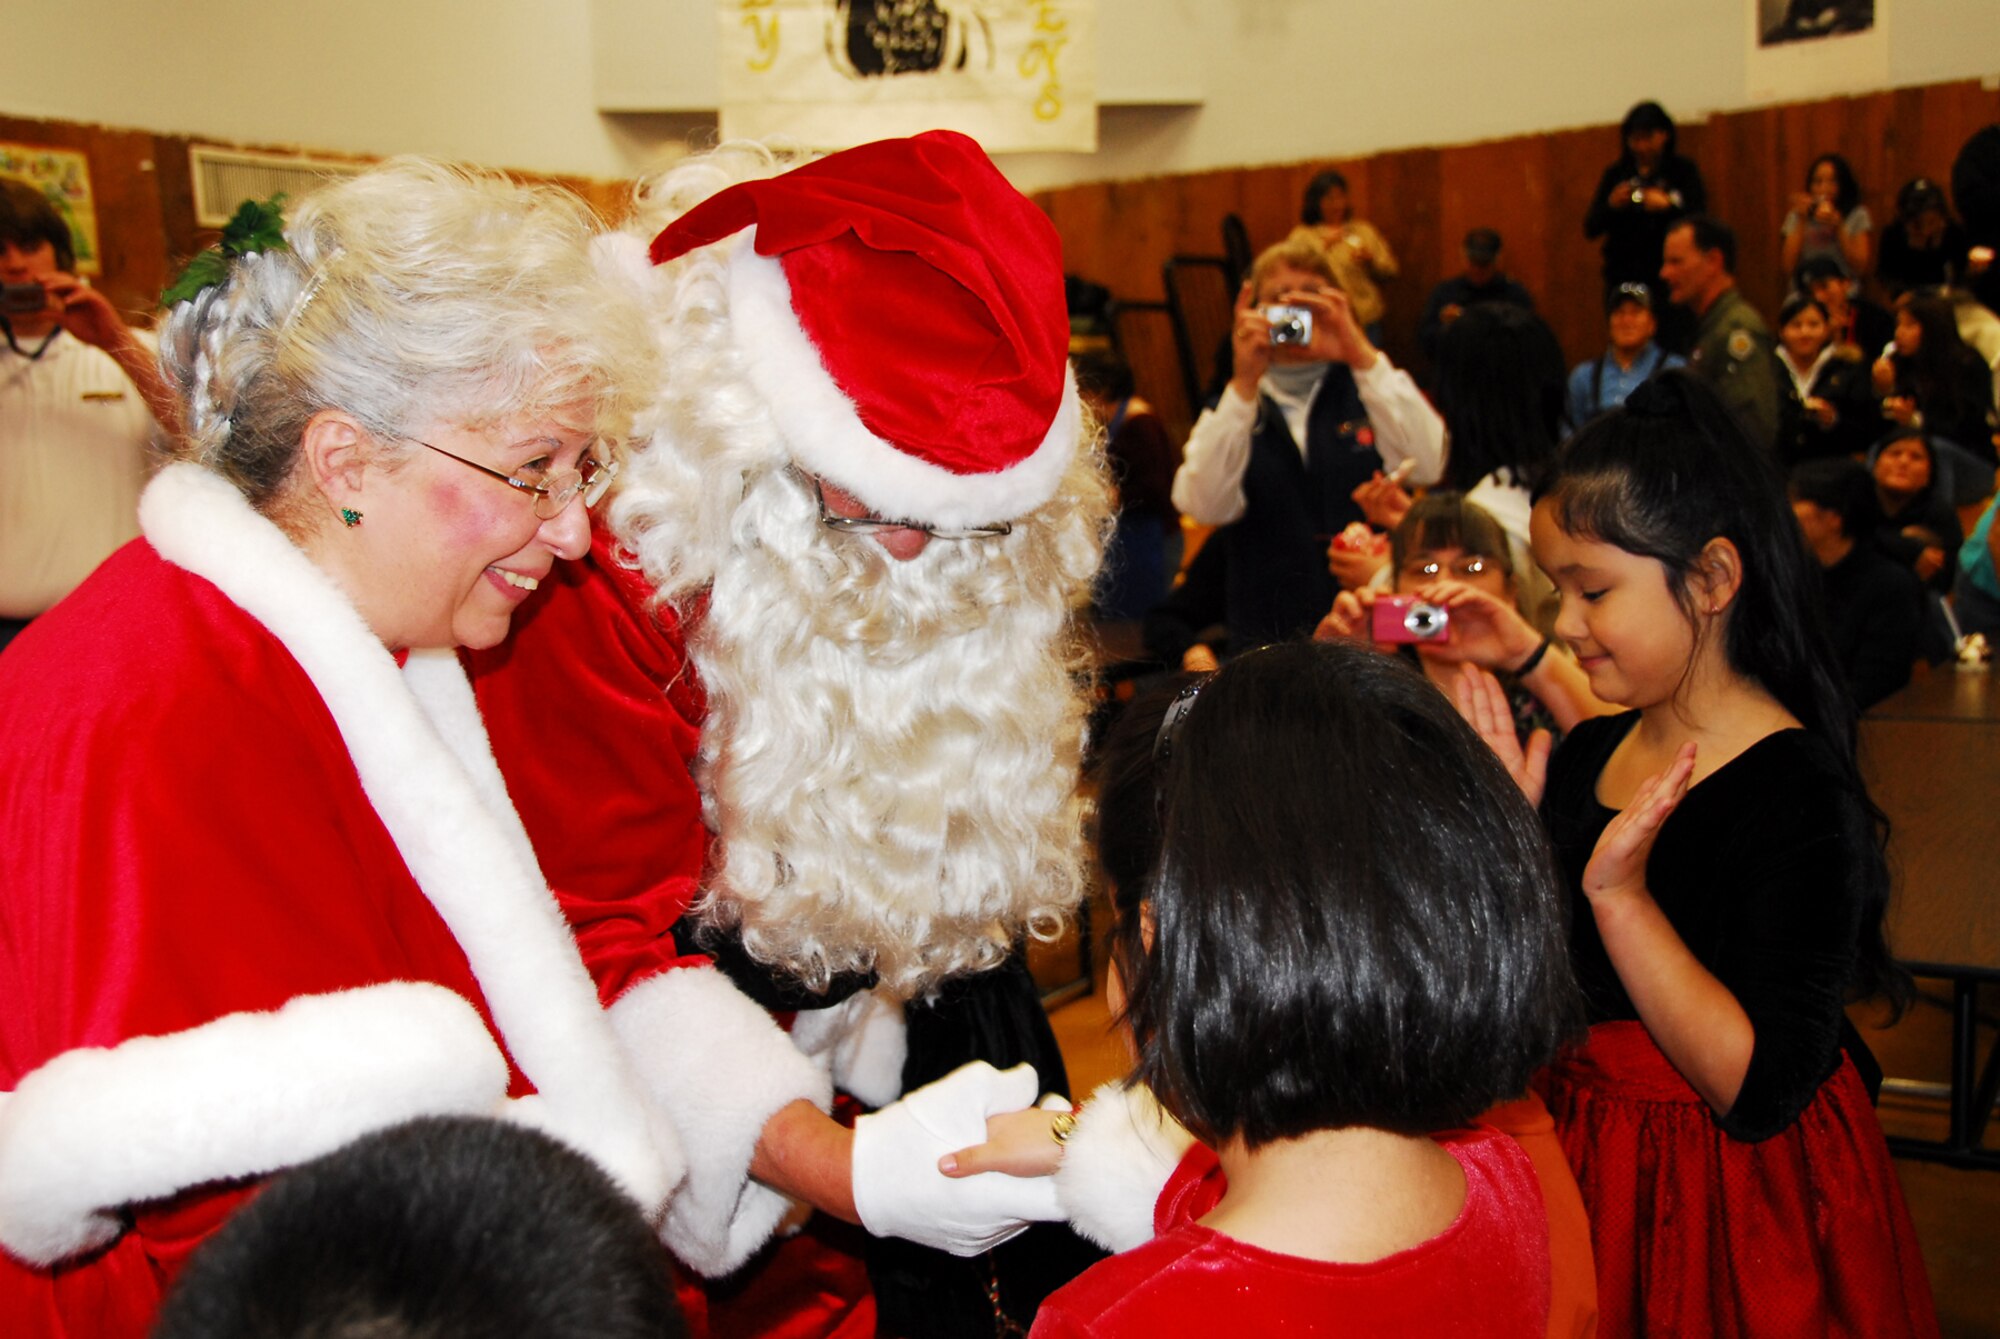 RUBY, Alaska -- Santa and Mrs. Claus meet a crowd of students in the Merreline A. Kangas School here Nov. 5. The Clauses were in town as part of the Alaska National Guard's Operation Santa Claus program. (U.S. Army photo/Kalei Brooks)